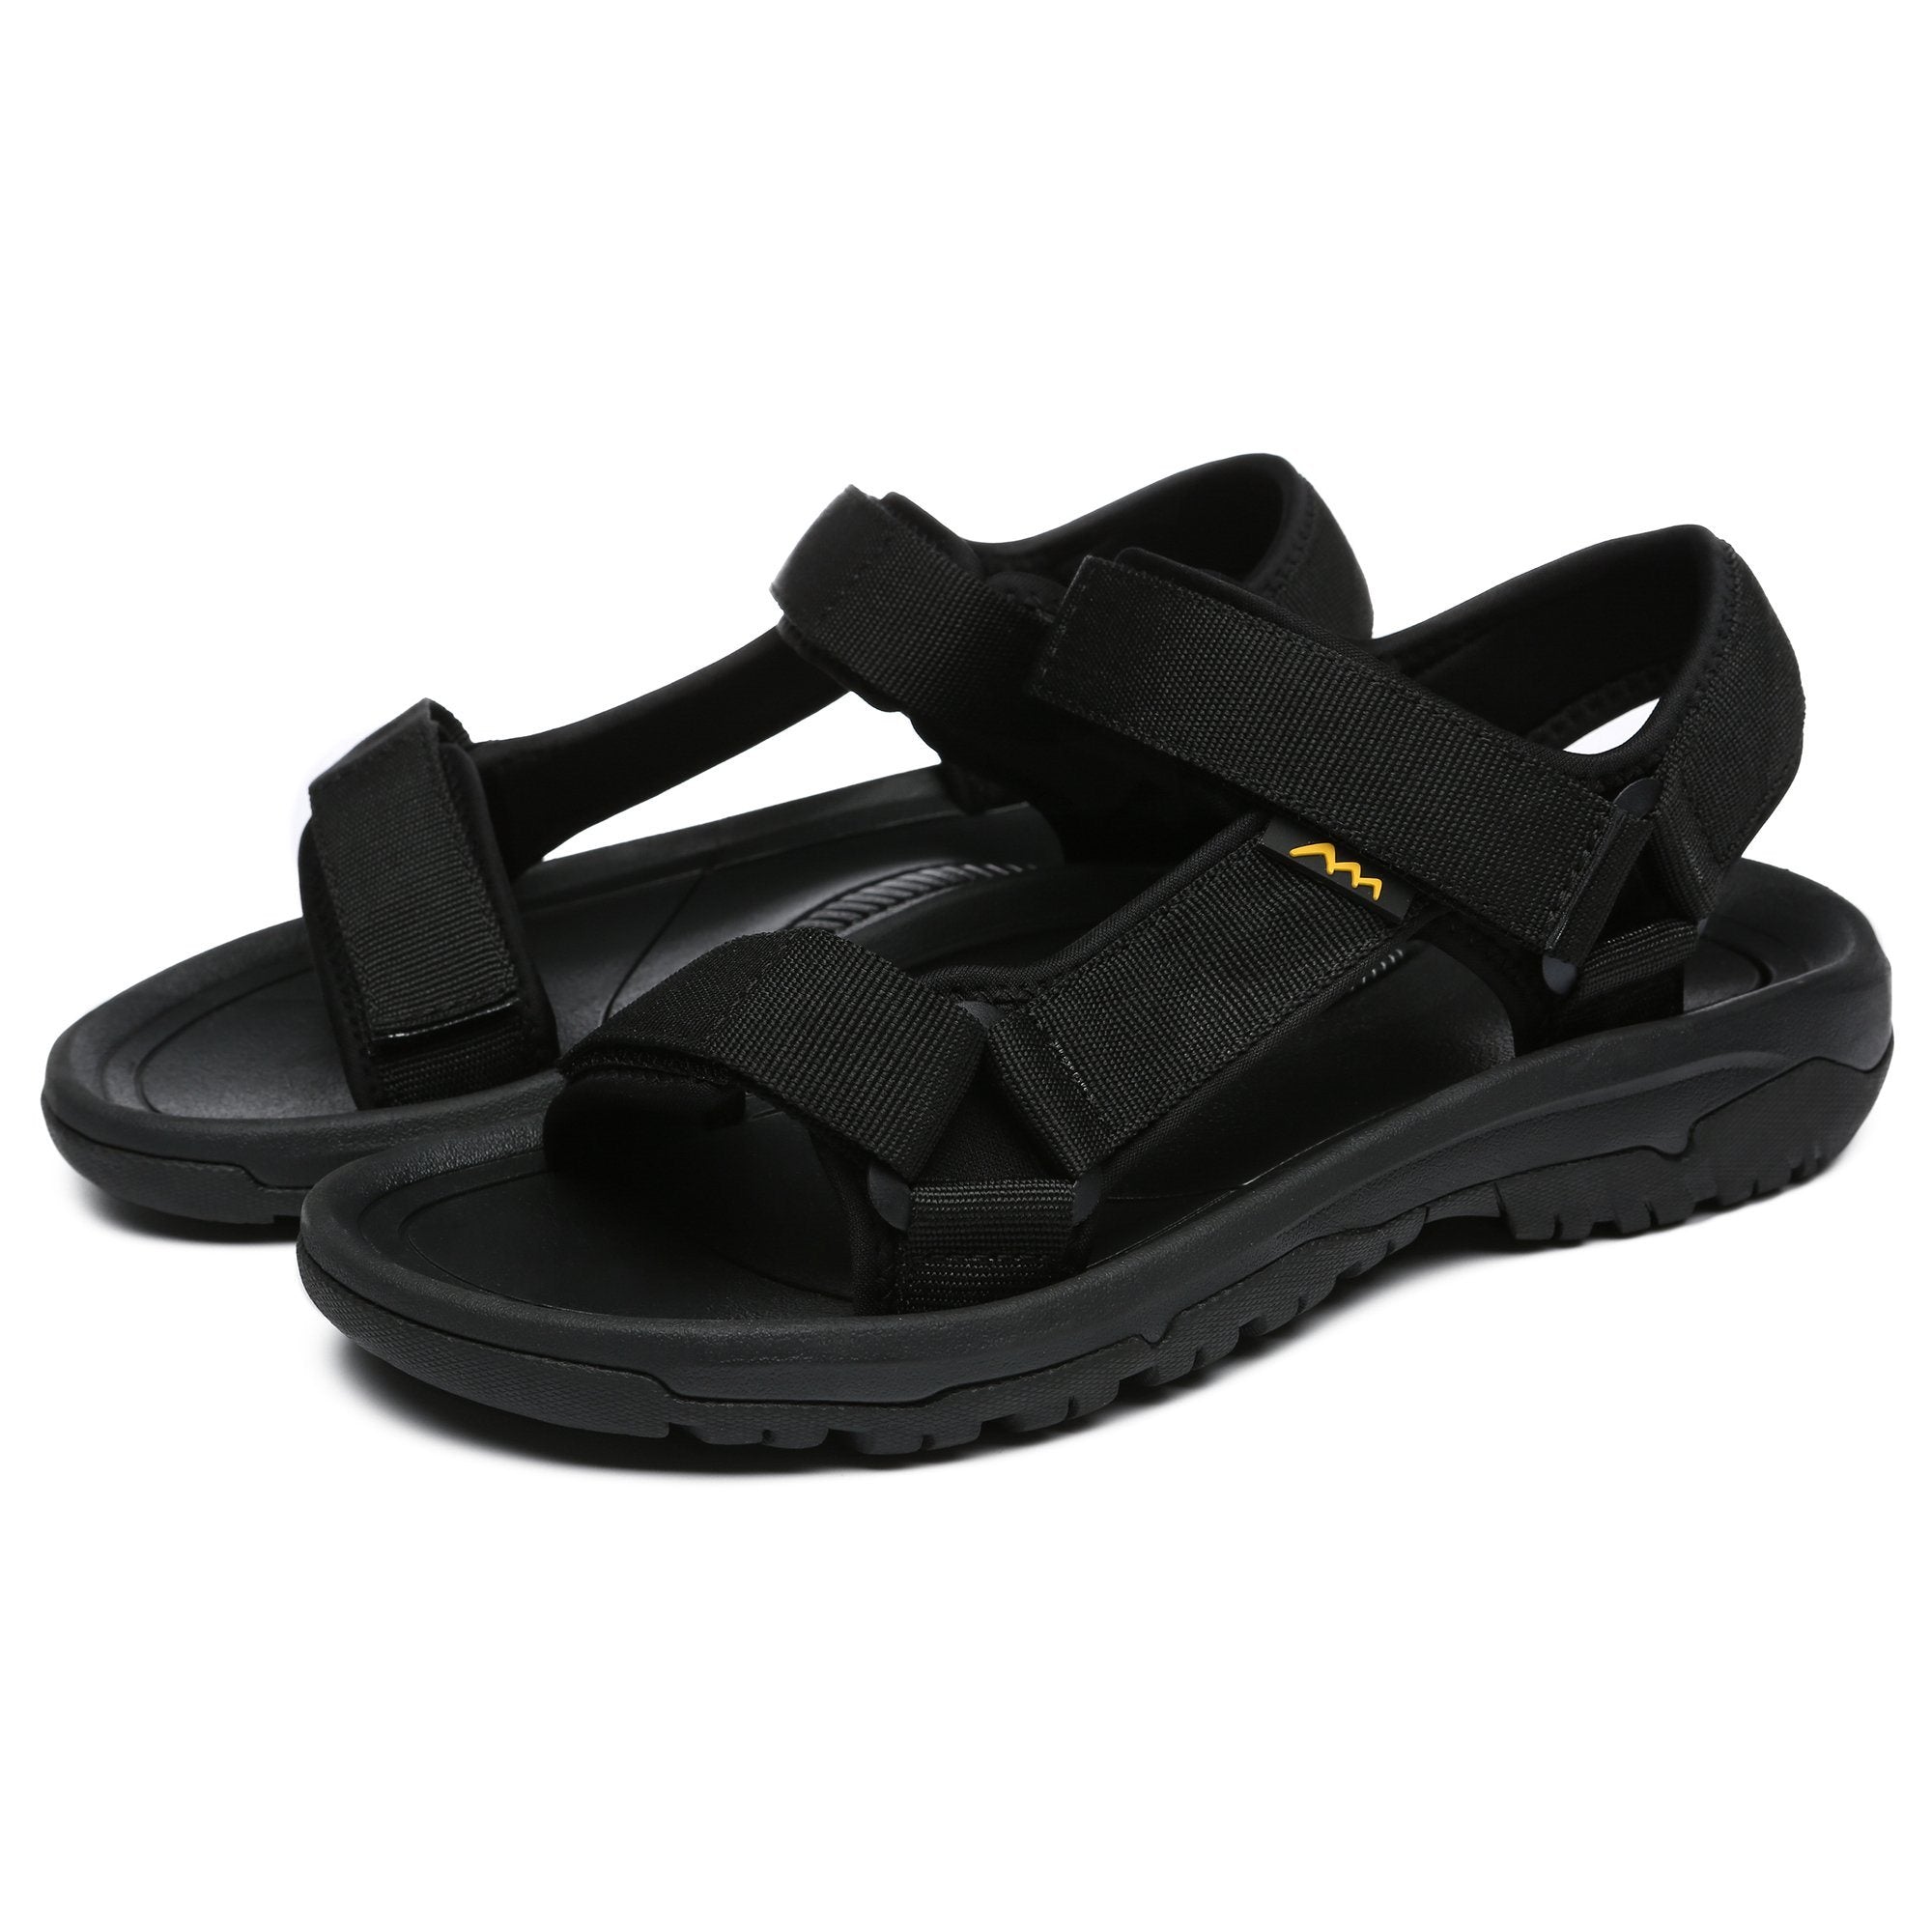 Luciano Summer Strap Sandals